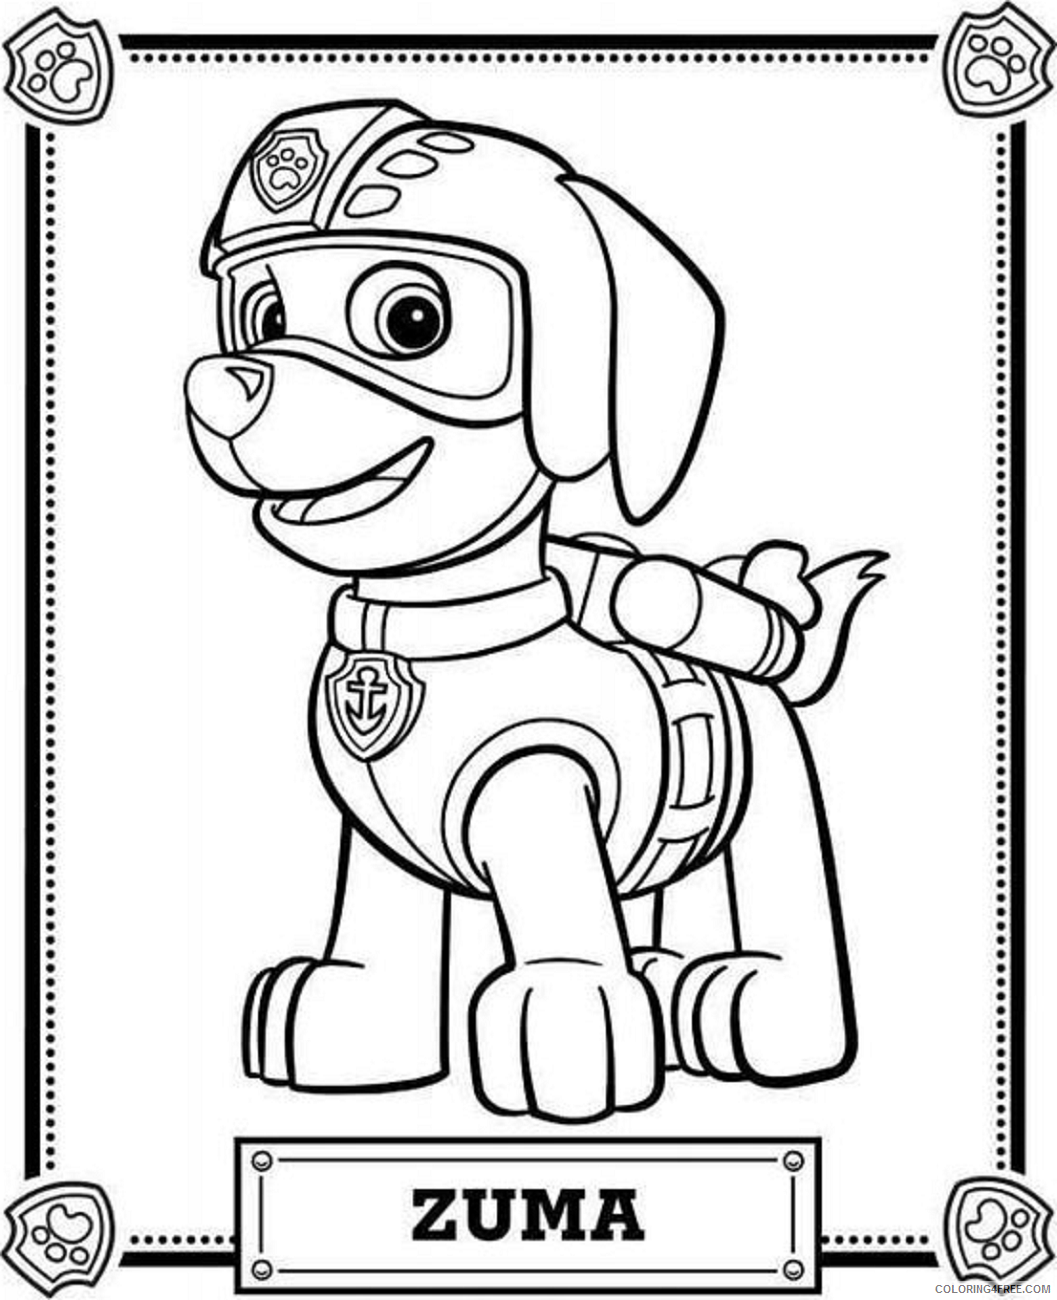 Paw Patrol Coloring Pages TV Film paw_patrol_zuma a4 Printable 2020 05884 Coloring4free